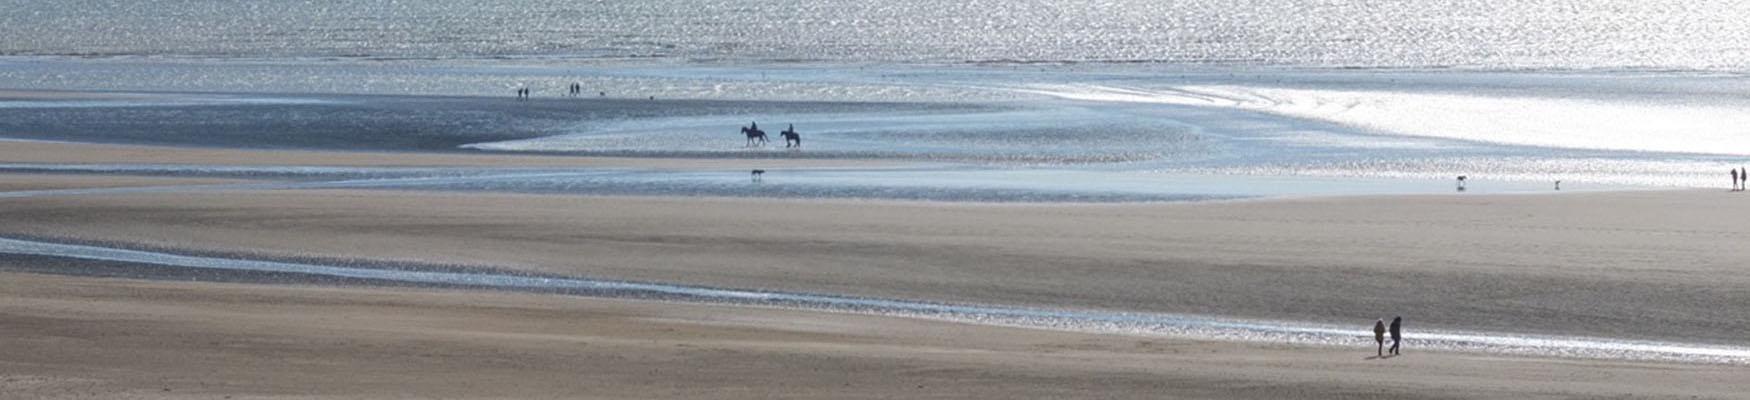 Wide view of Camber beach with horses and sea in distance